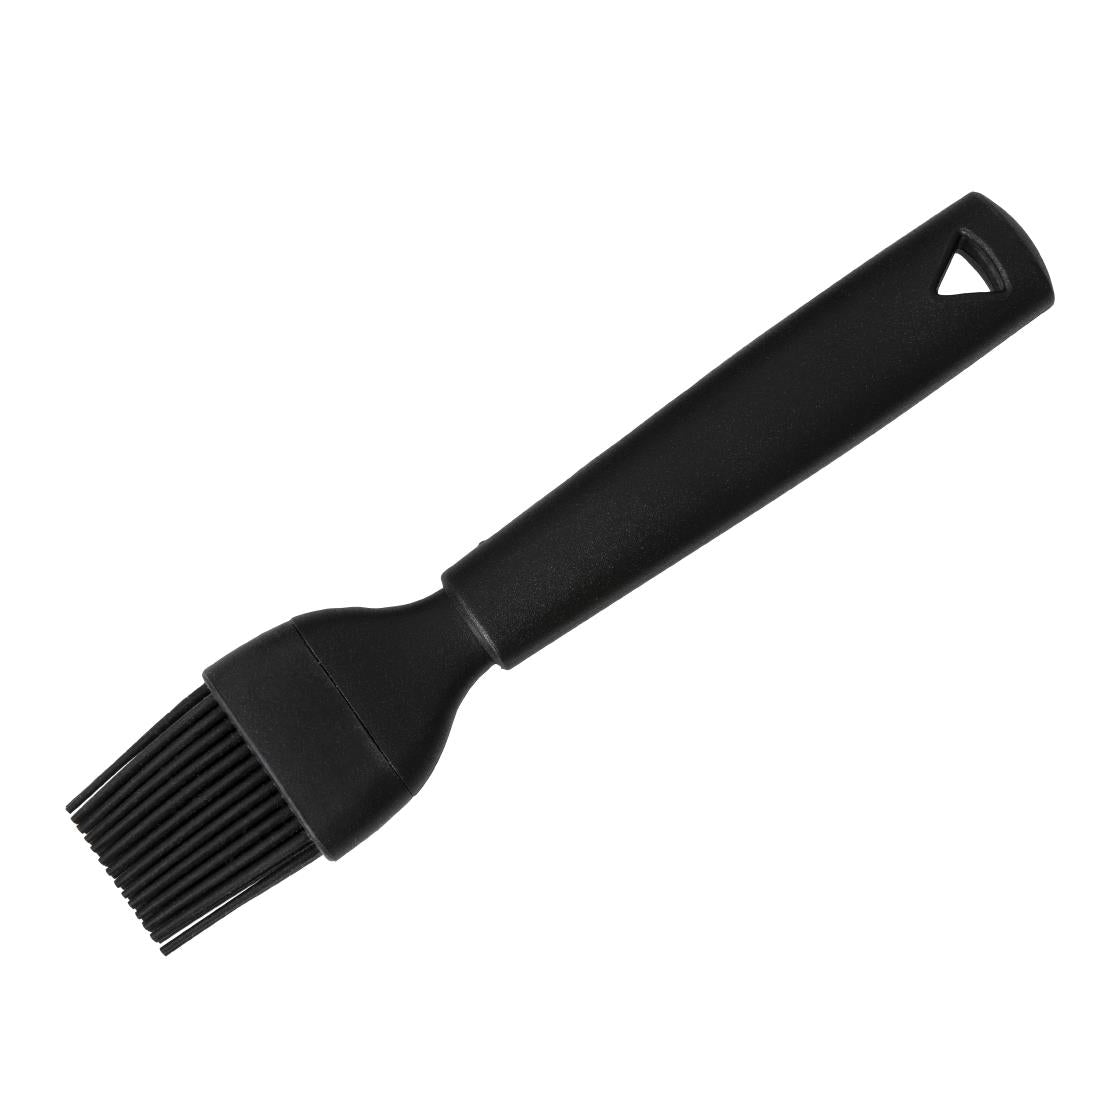 DF587 Matfer High Heat Silicone Cooking Brush 19cm JD Catering Equipment Solutions Ltd